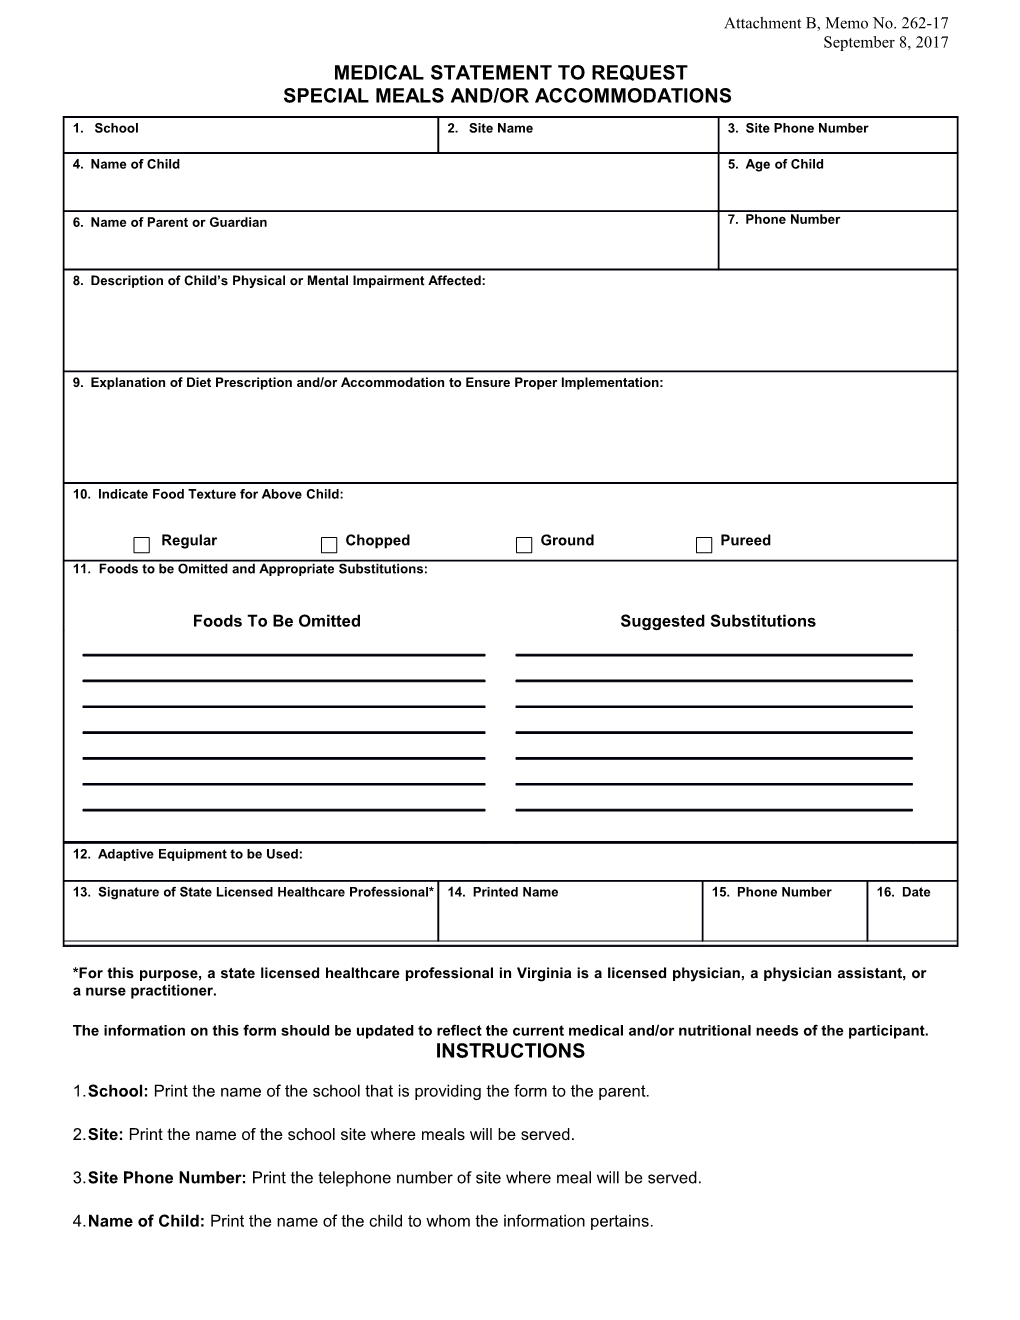 Medical Statement Form for SNP - USDA Civil Rights (CA Dept of Education)